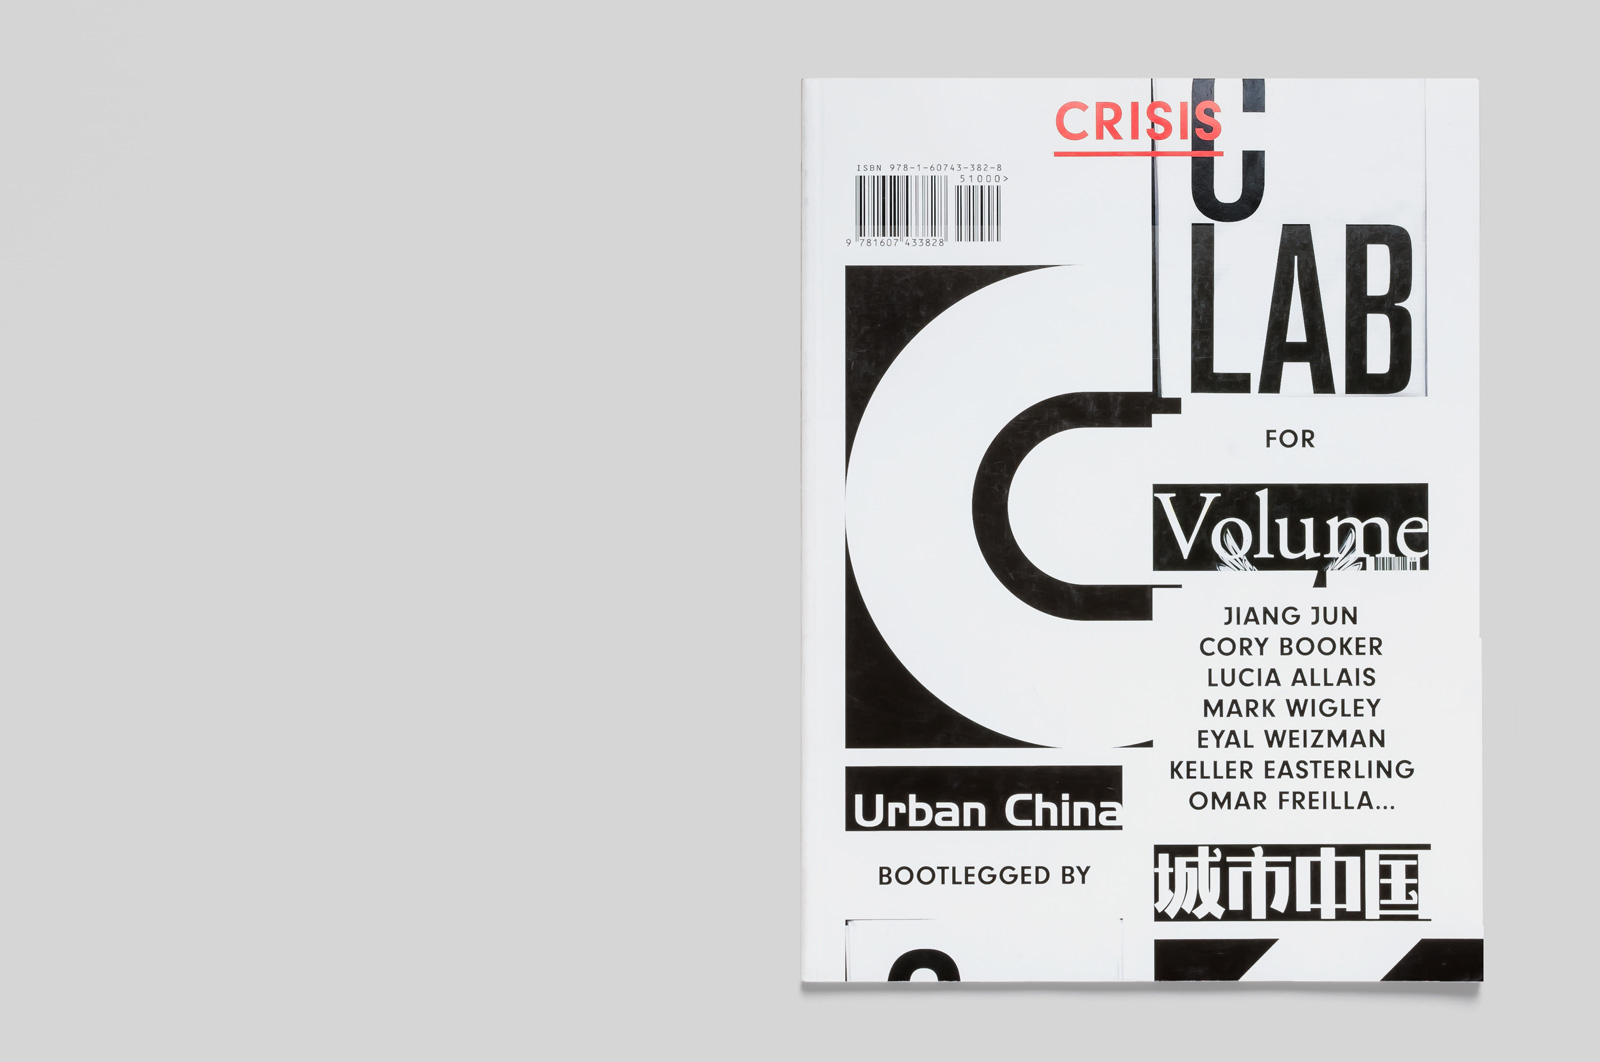 Crisis: Urban China bootlegged by C-Lab for Volume Magazine  - MTWTF